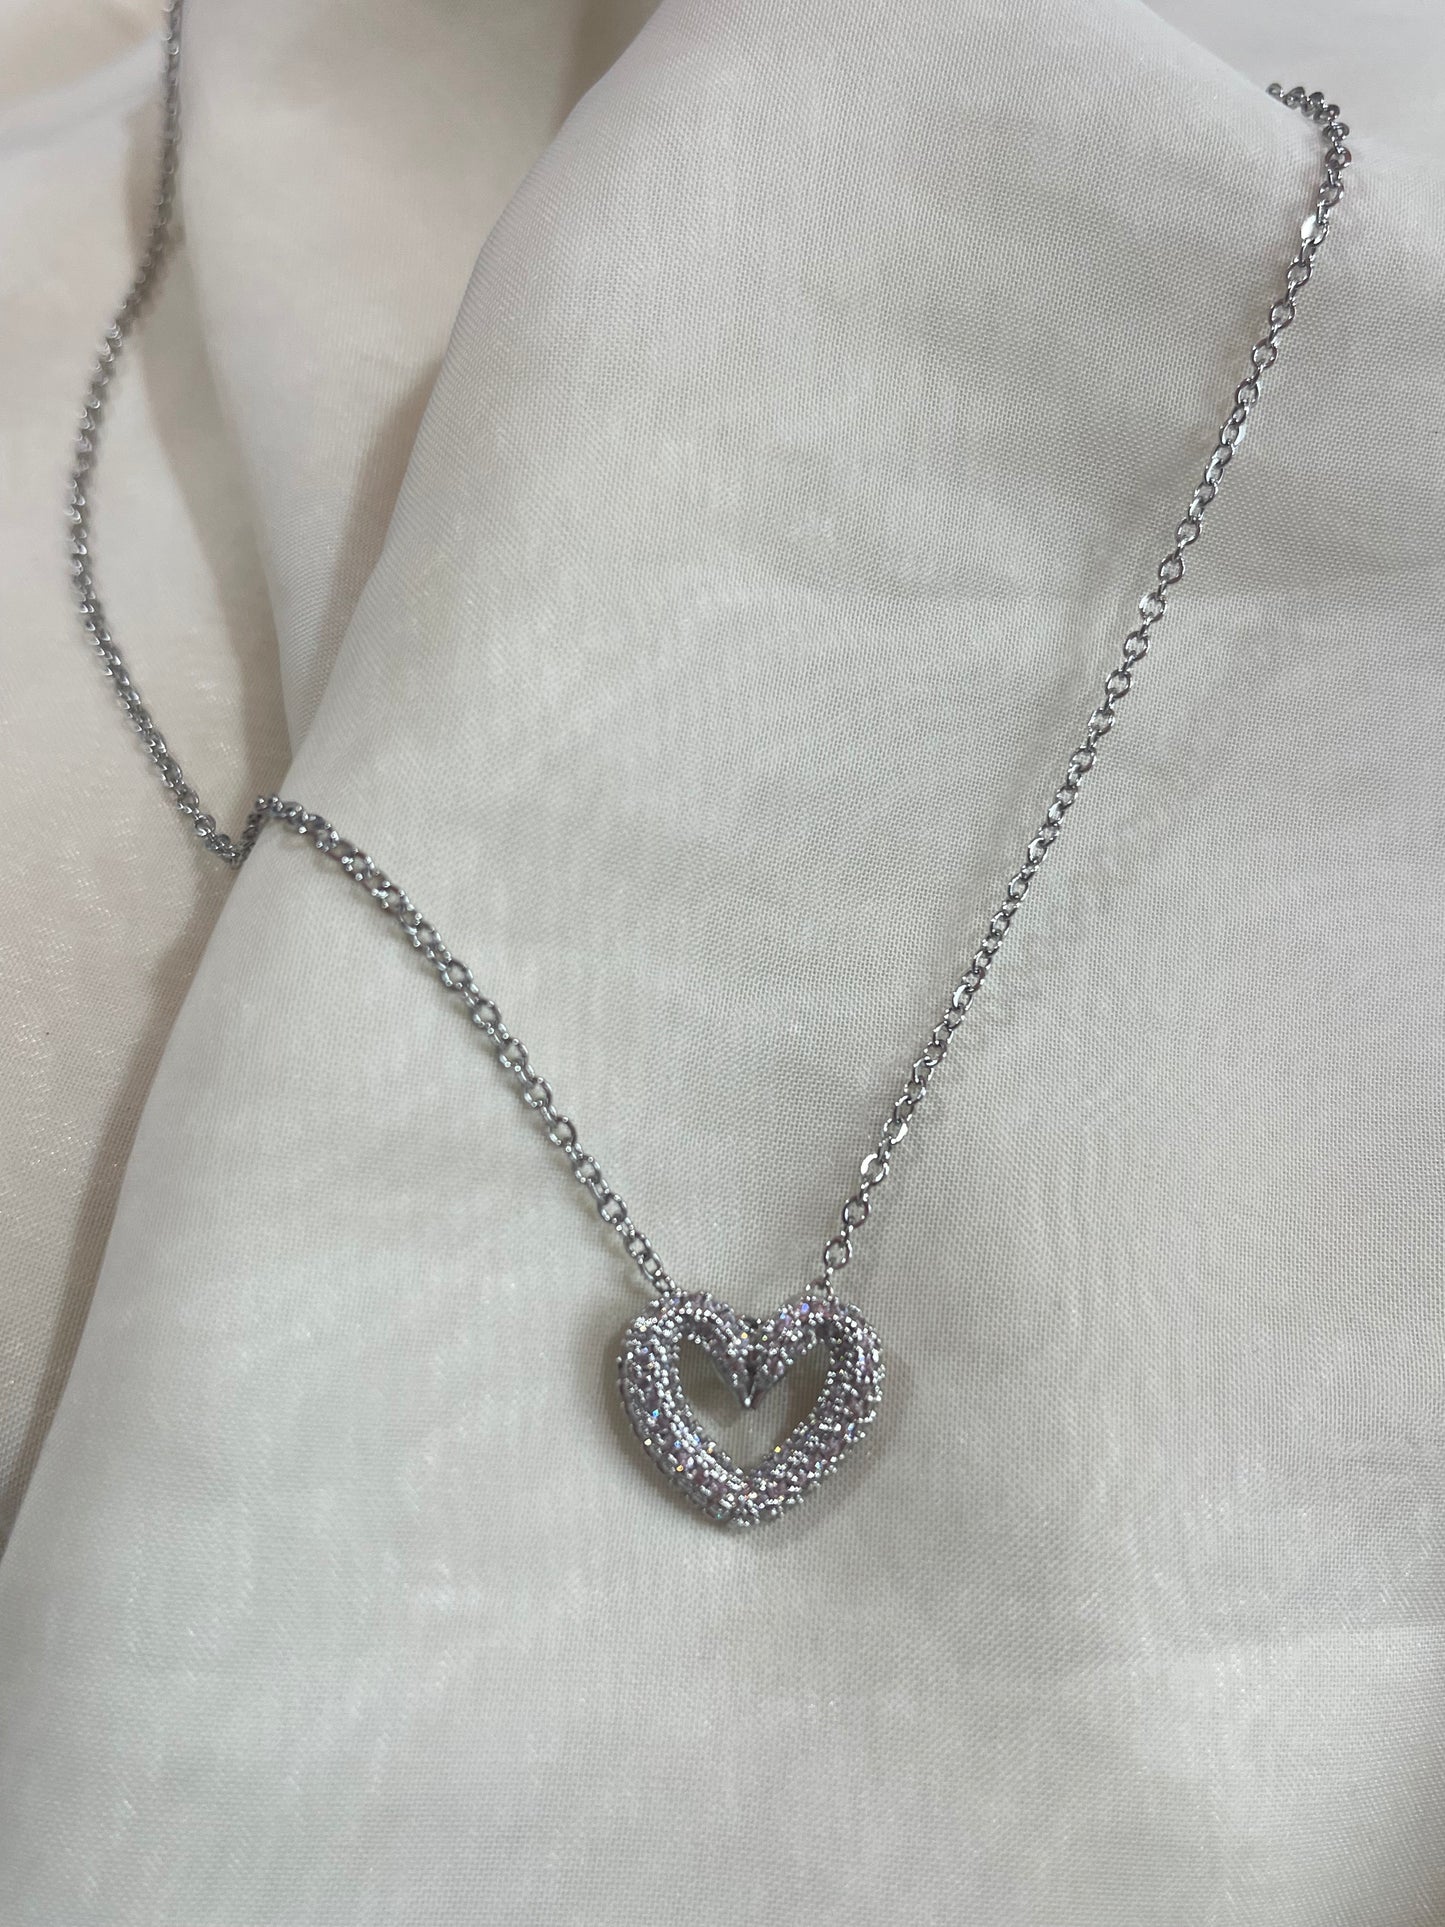 Lovers Necklace